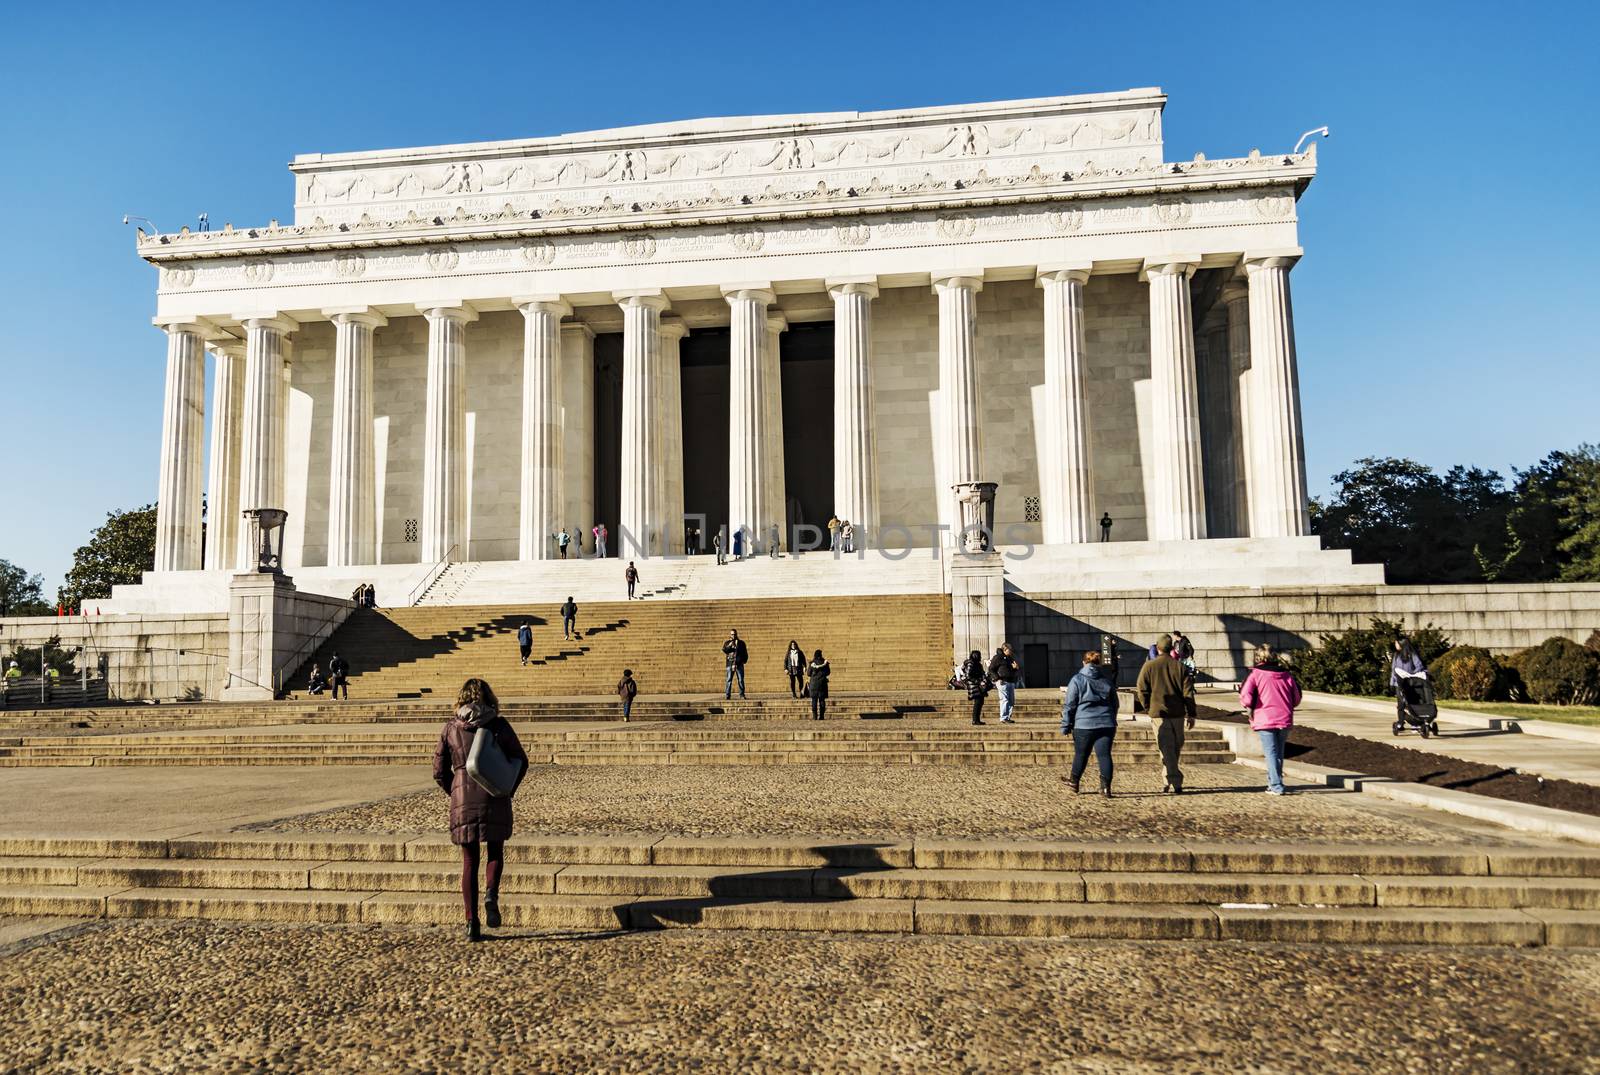 WASHINGTON DC, DECEMBER 2I: The Lincoln Memorial, located on the western end of the National Mall on December 21, 2017 in Washington DC, USA